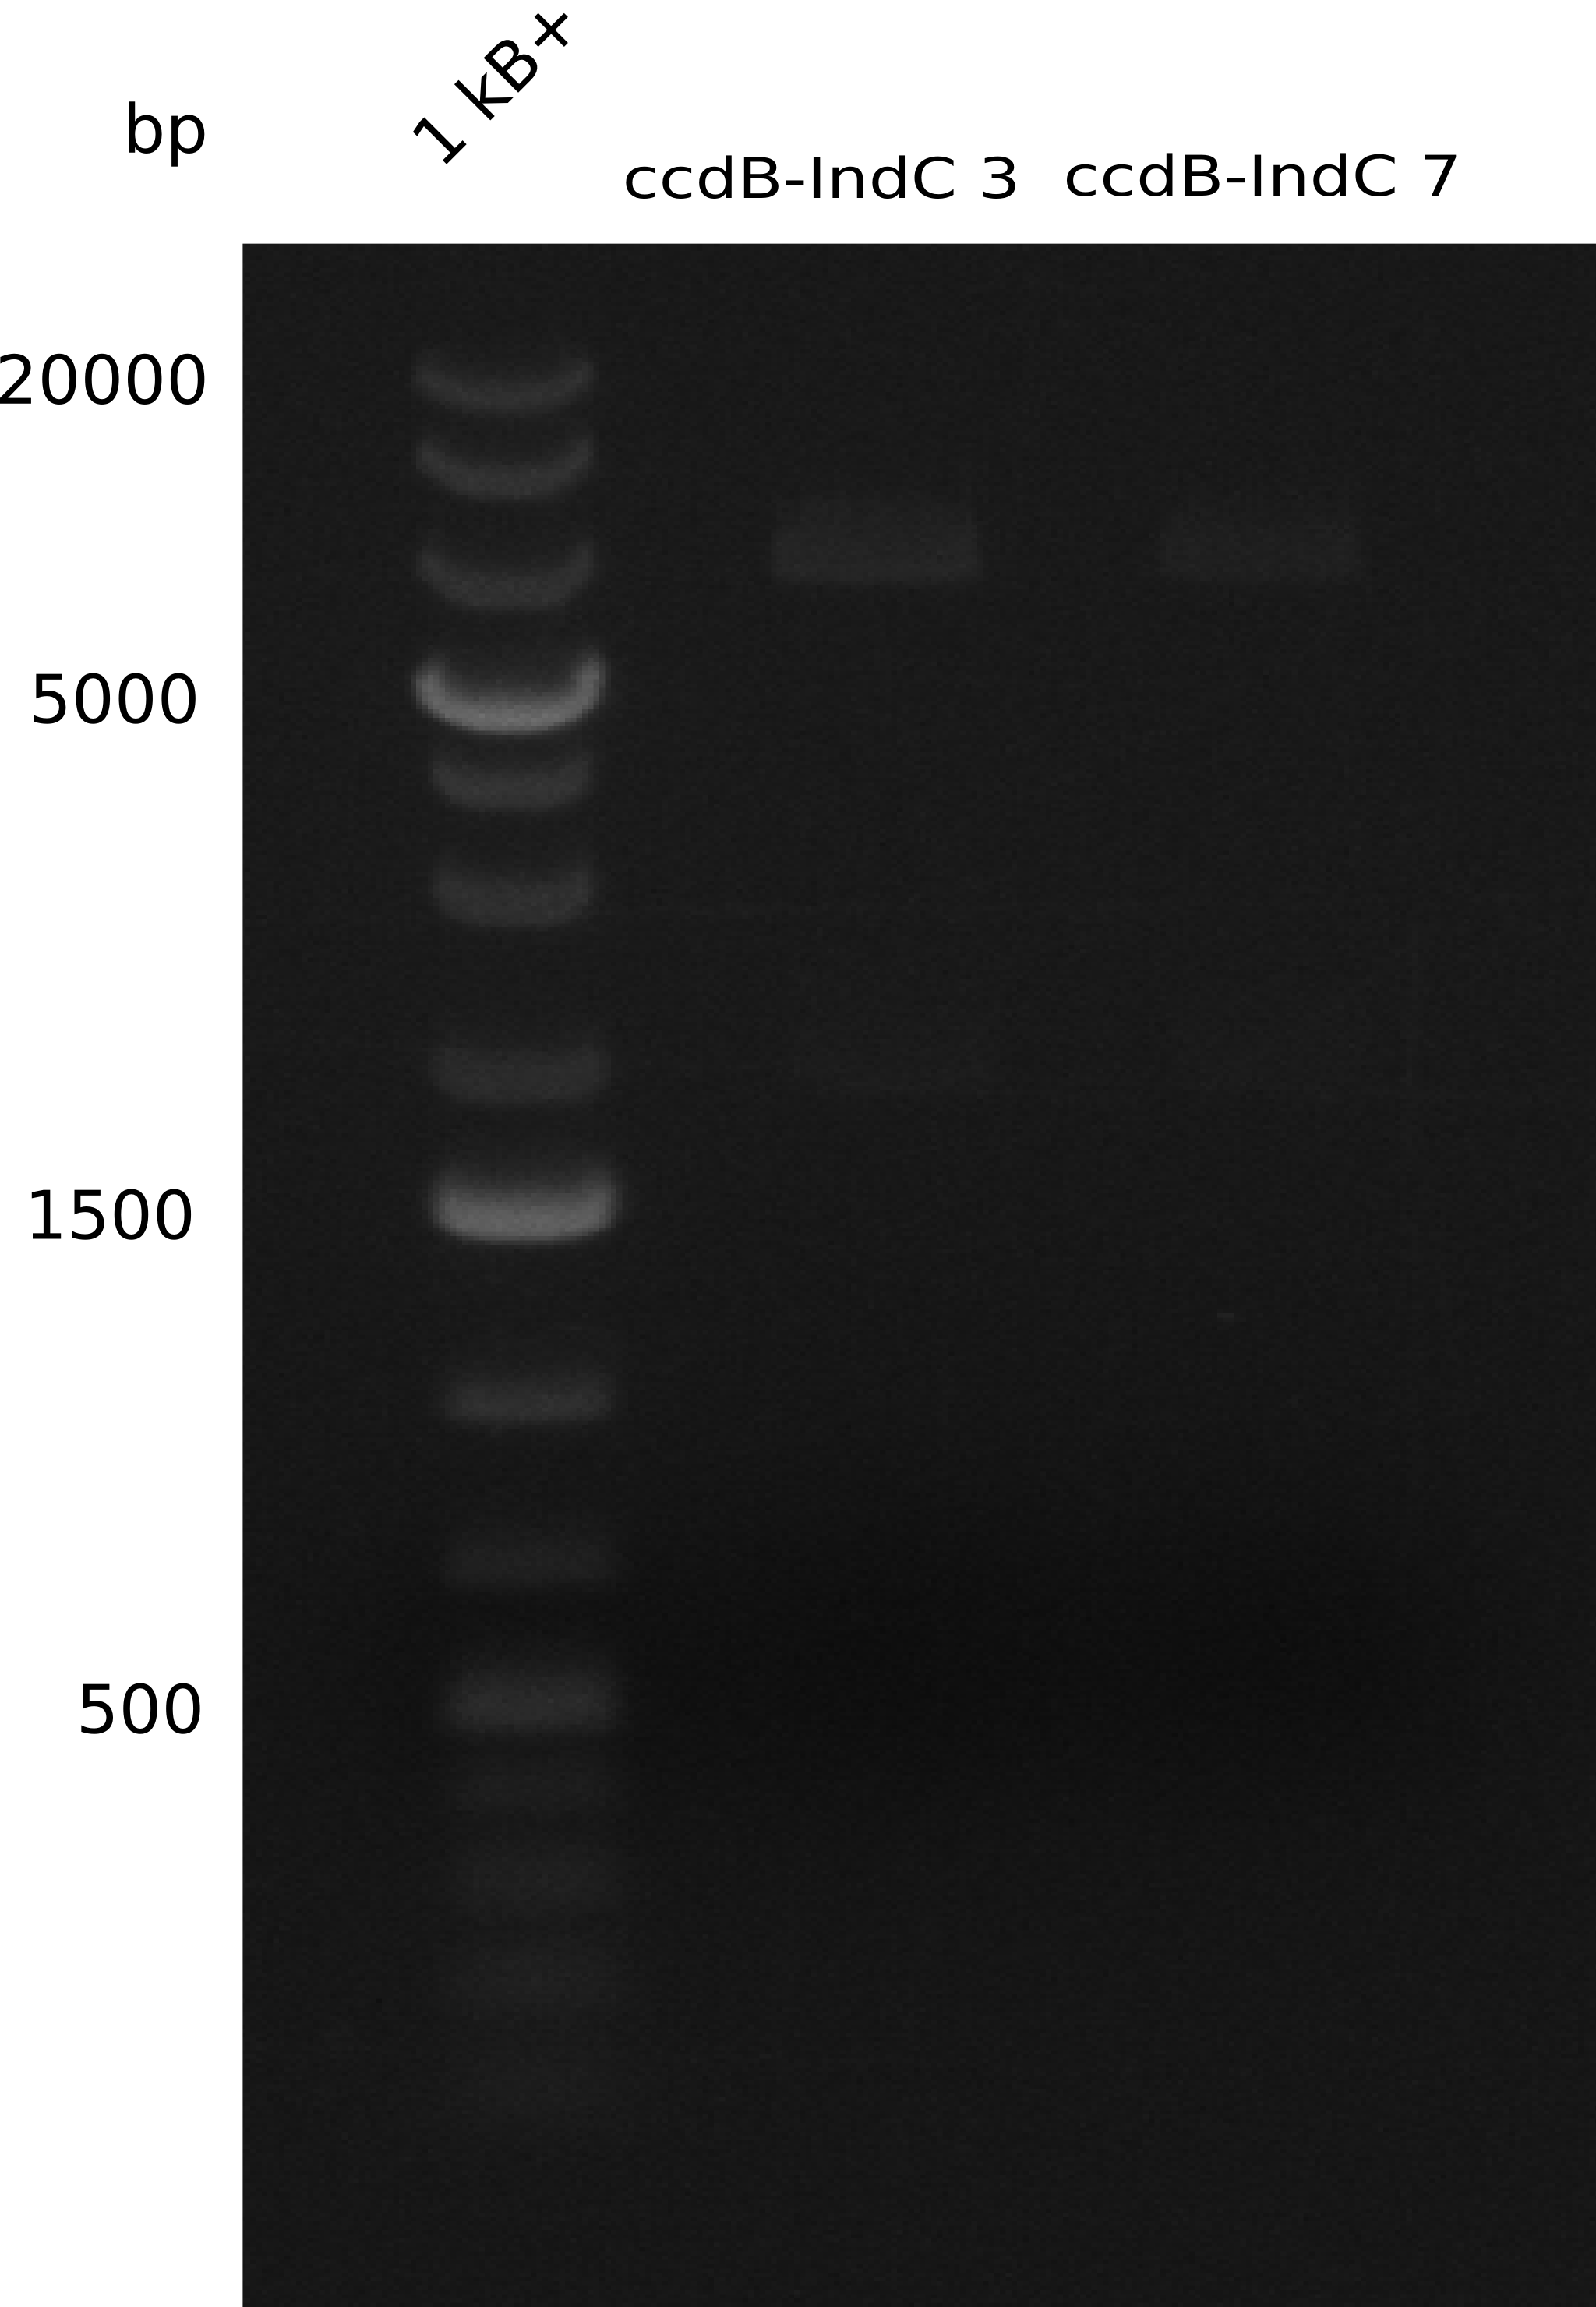 Digests of ccdB-indC3 and 7 with Pst1 and EcoRI. Results were positive.